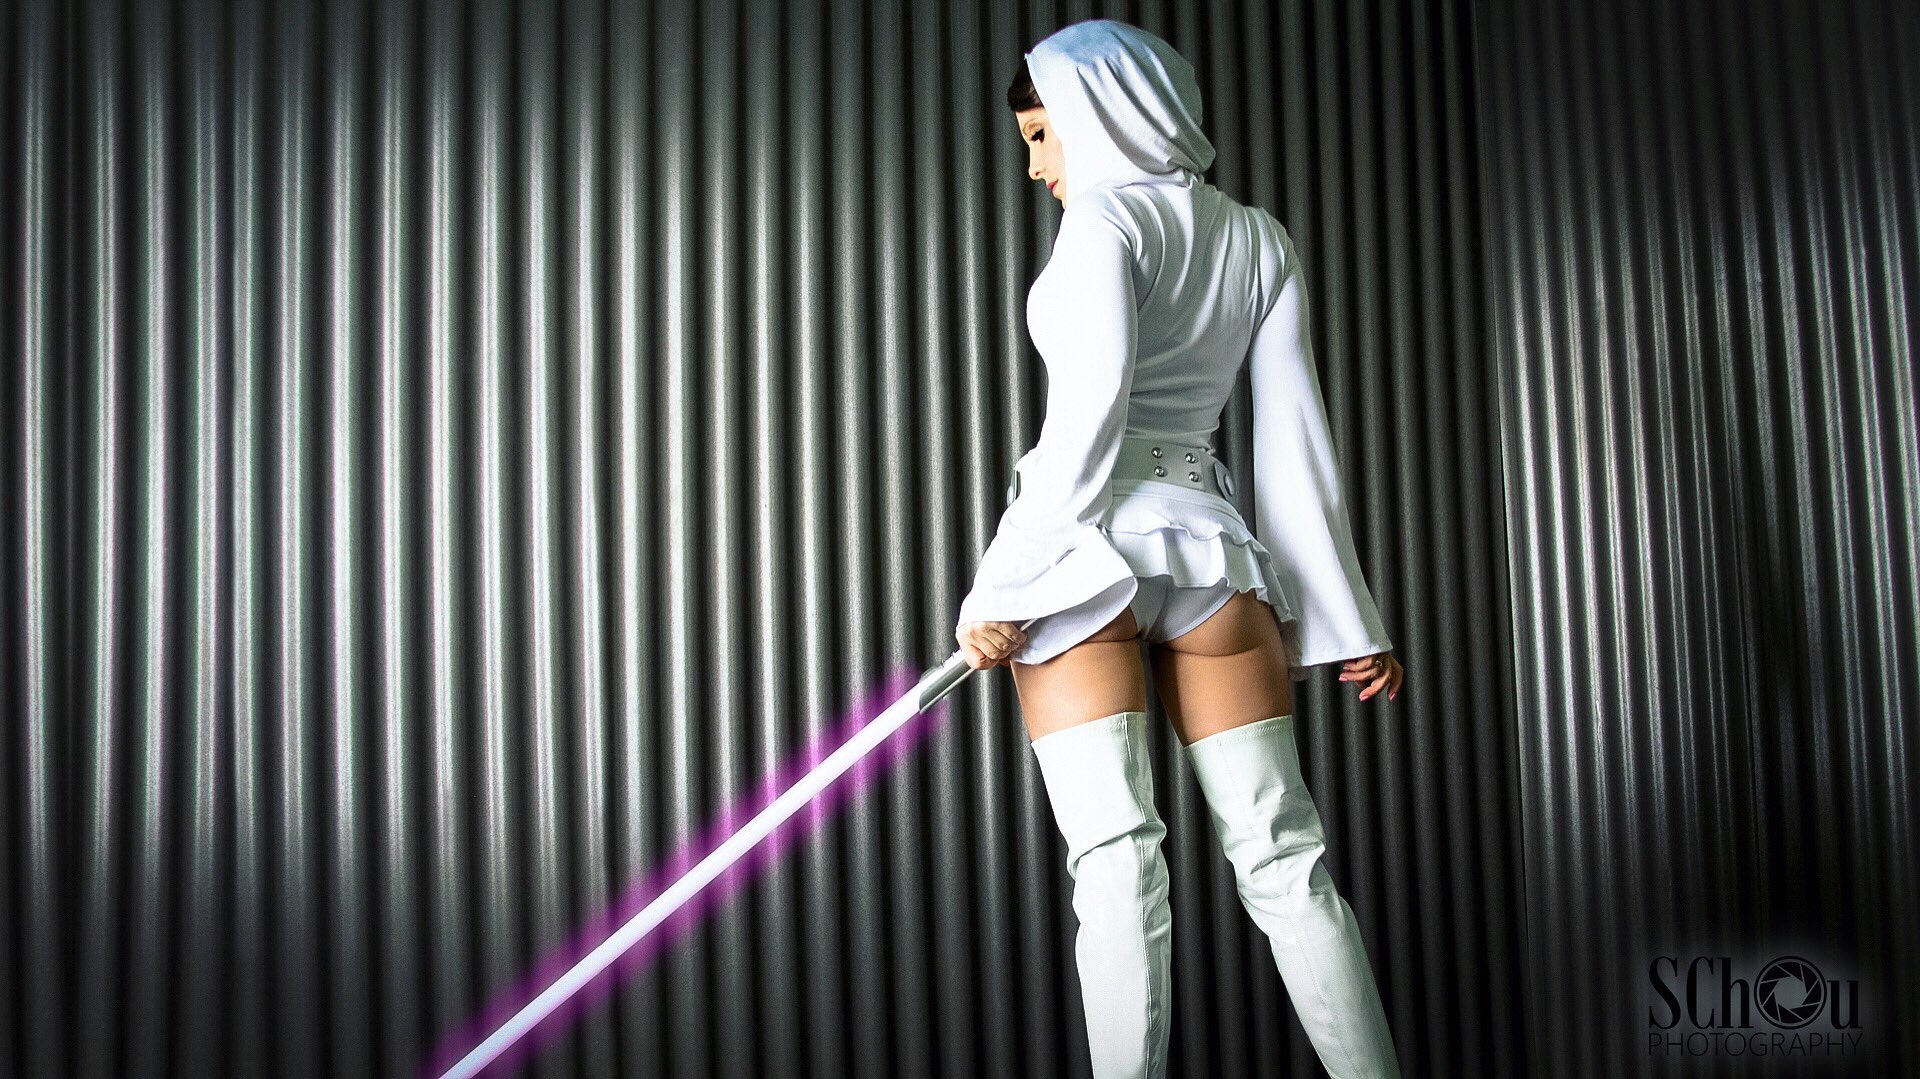 Raychul Moore on X: Princess Leia butt 😇💖 So happy with how these pics  are coming out!! Will share more soon!! Thank you Schou Photography for  making me look super cool!! t.coLECssvoa0Z 